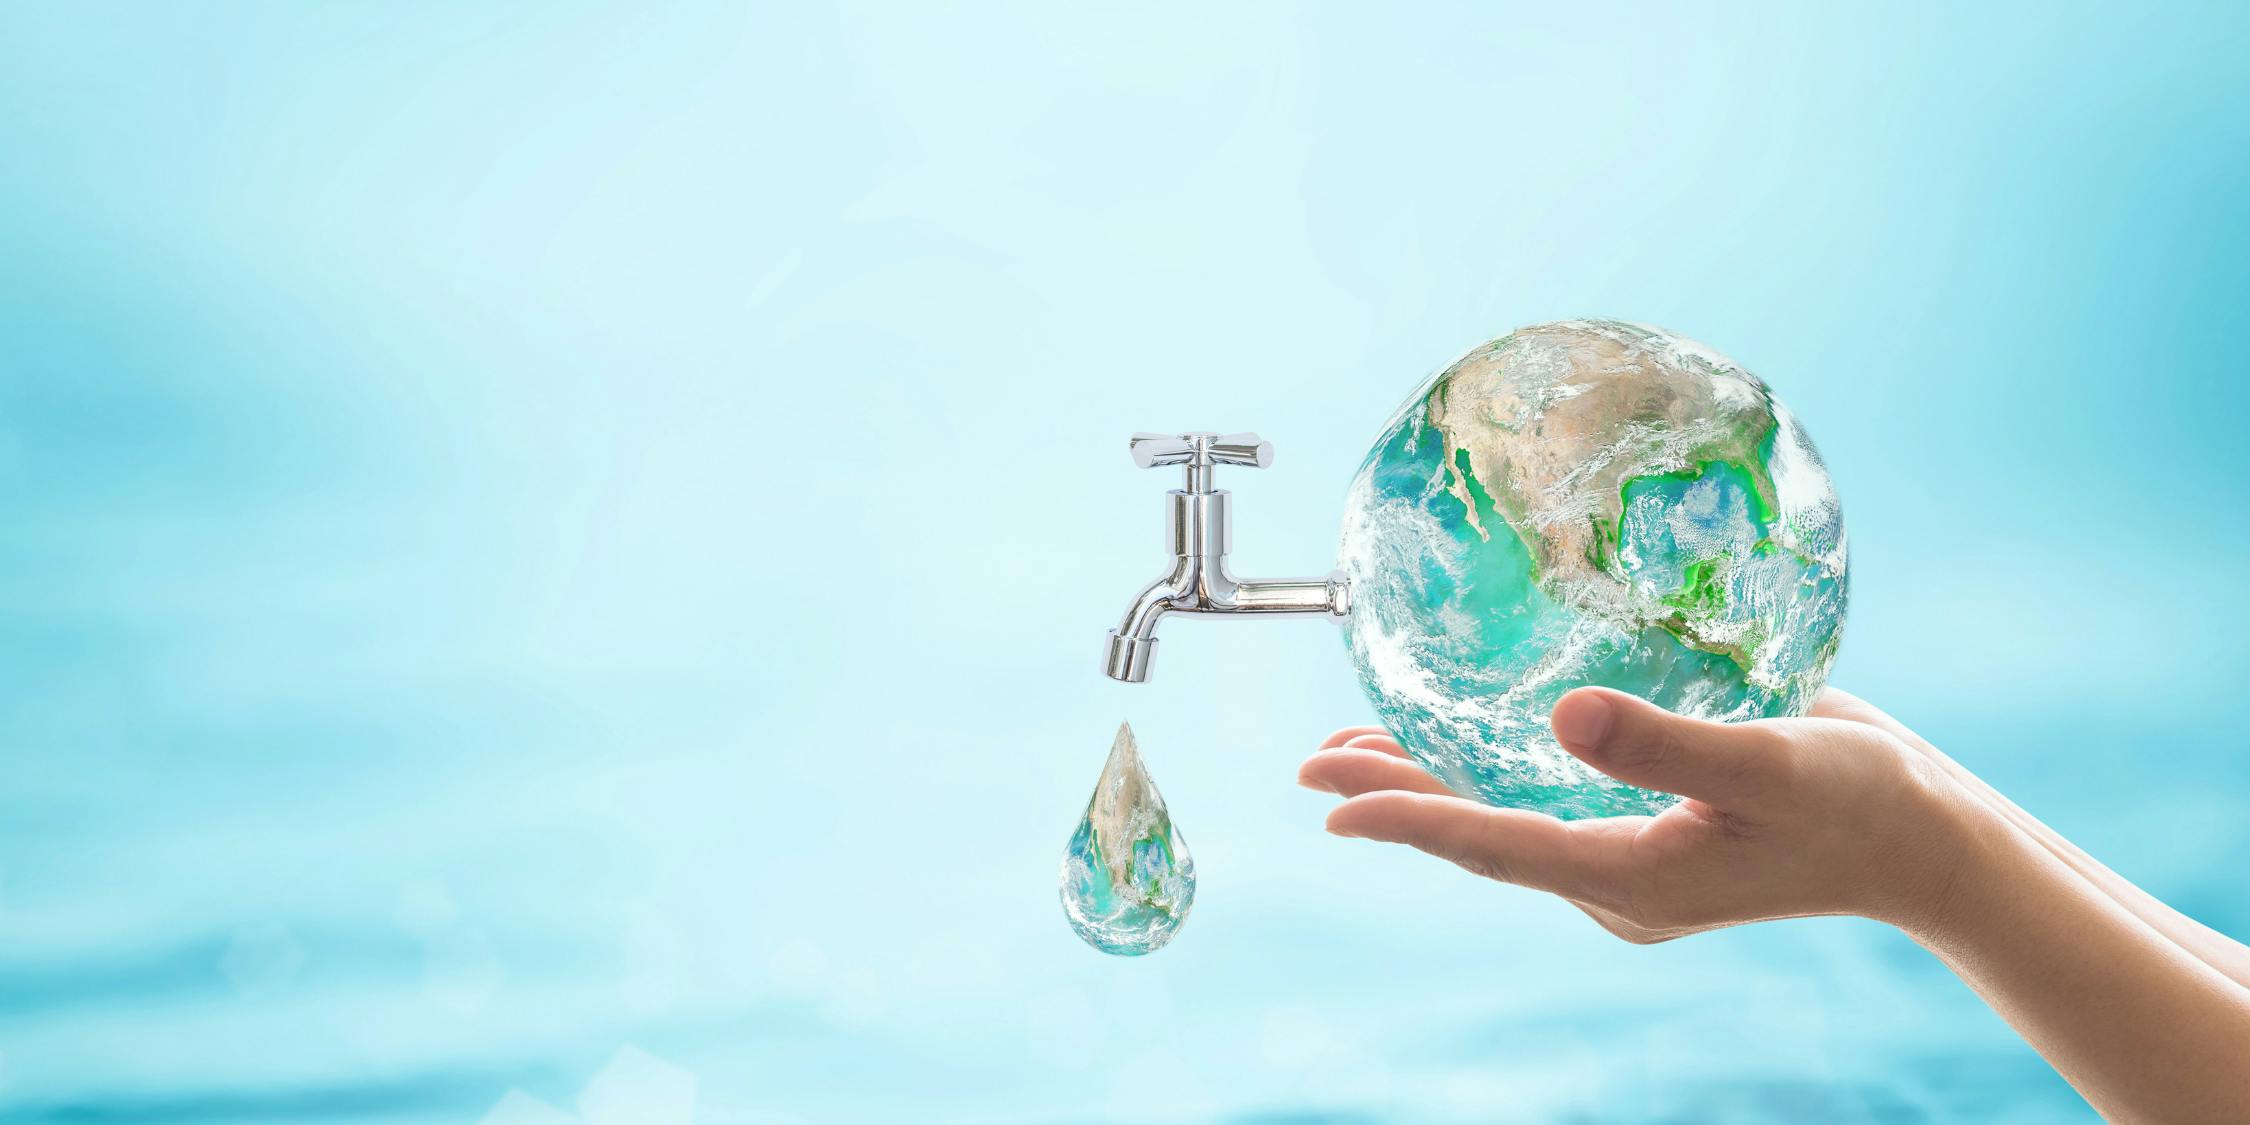 hands holding a water globe with tap attached